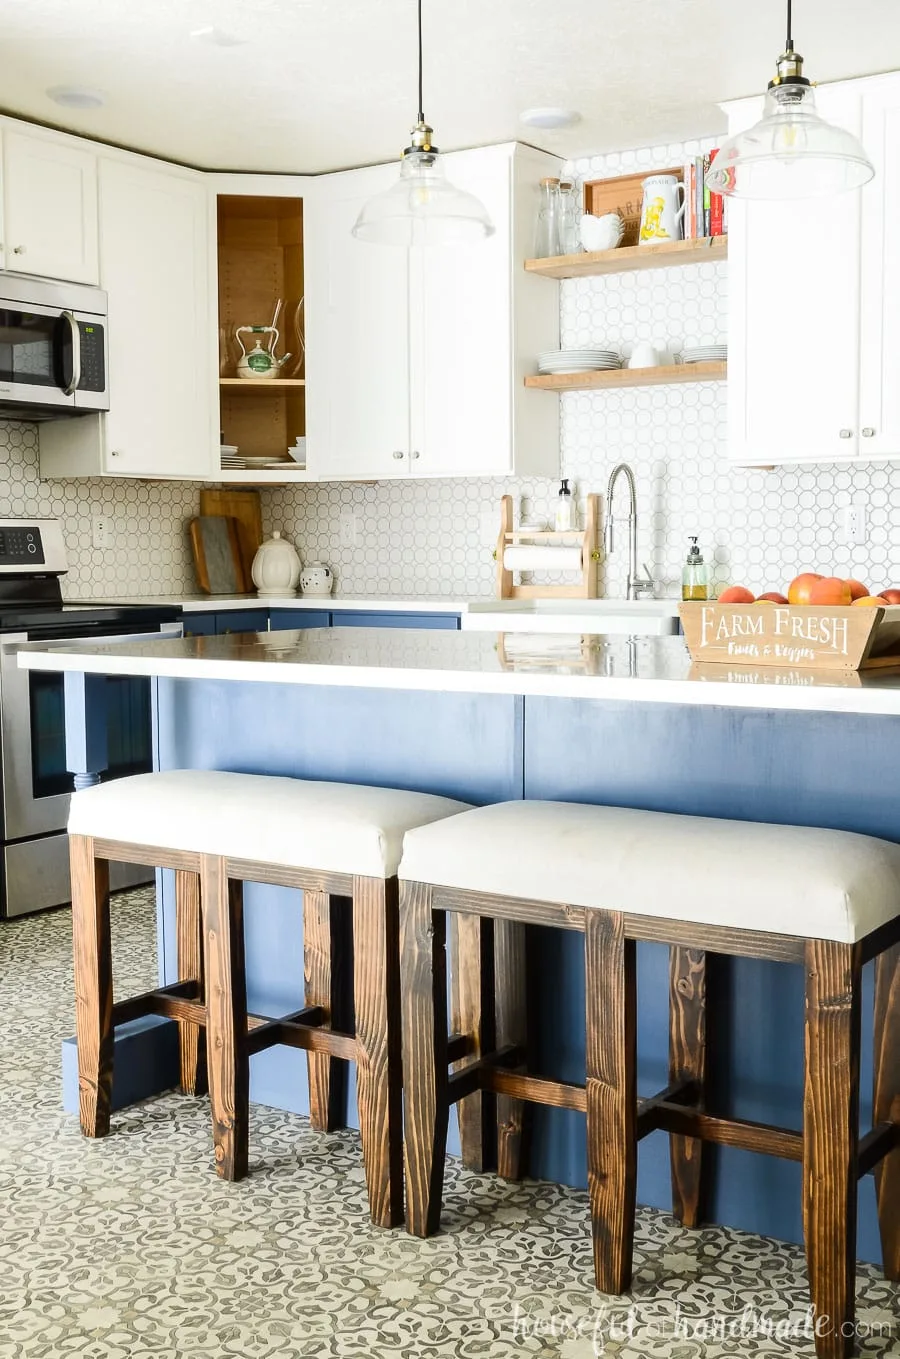 Blue farmhouse kitchen island with bar stool benches at it. White two tone kitchen cabinets in the background.